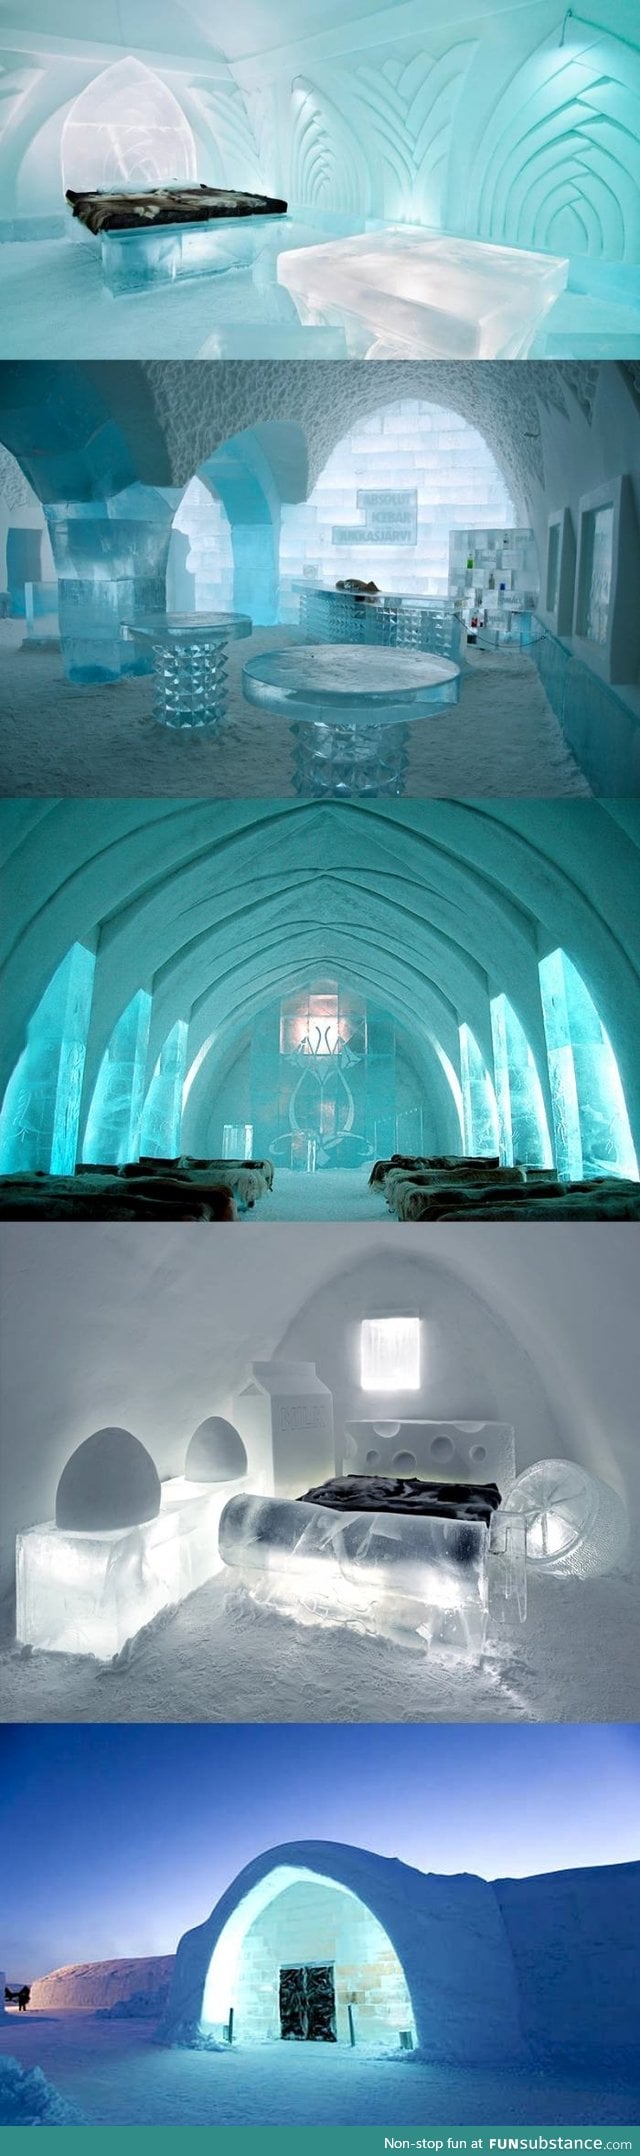 In Sweden there is a hotel completely made out of ice and snow